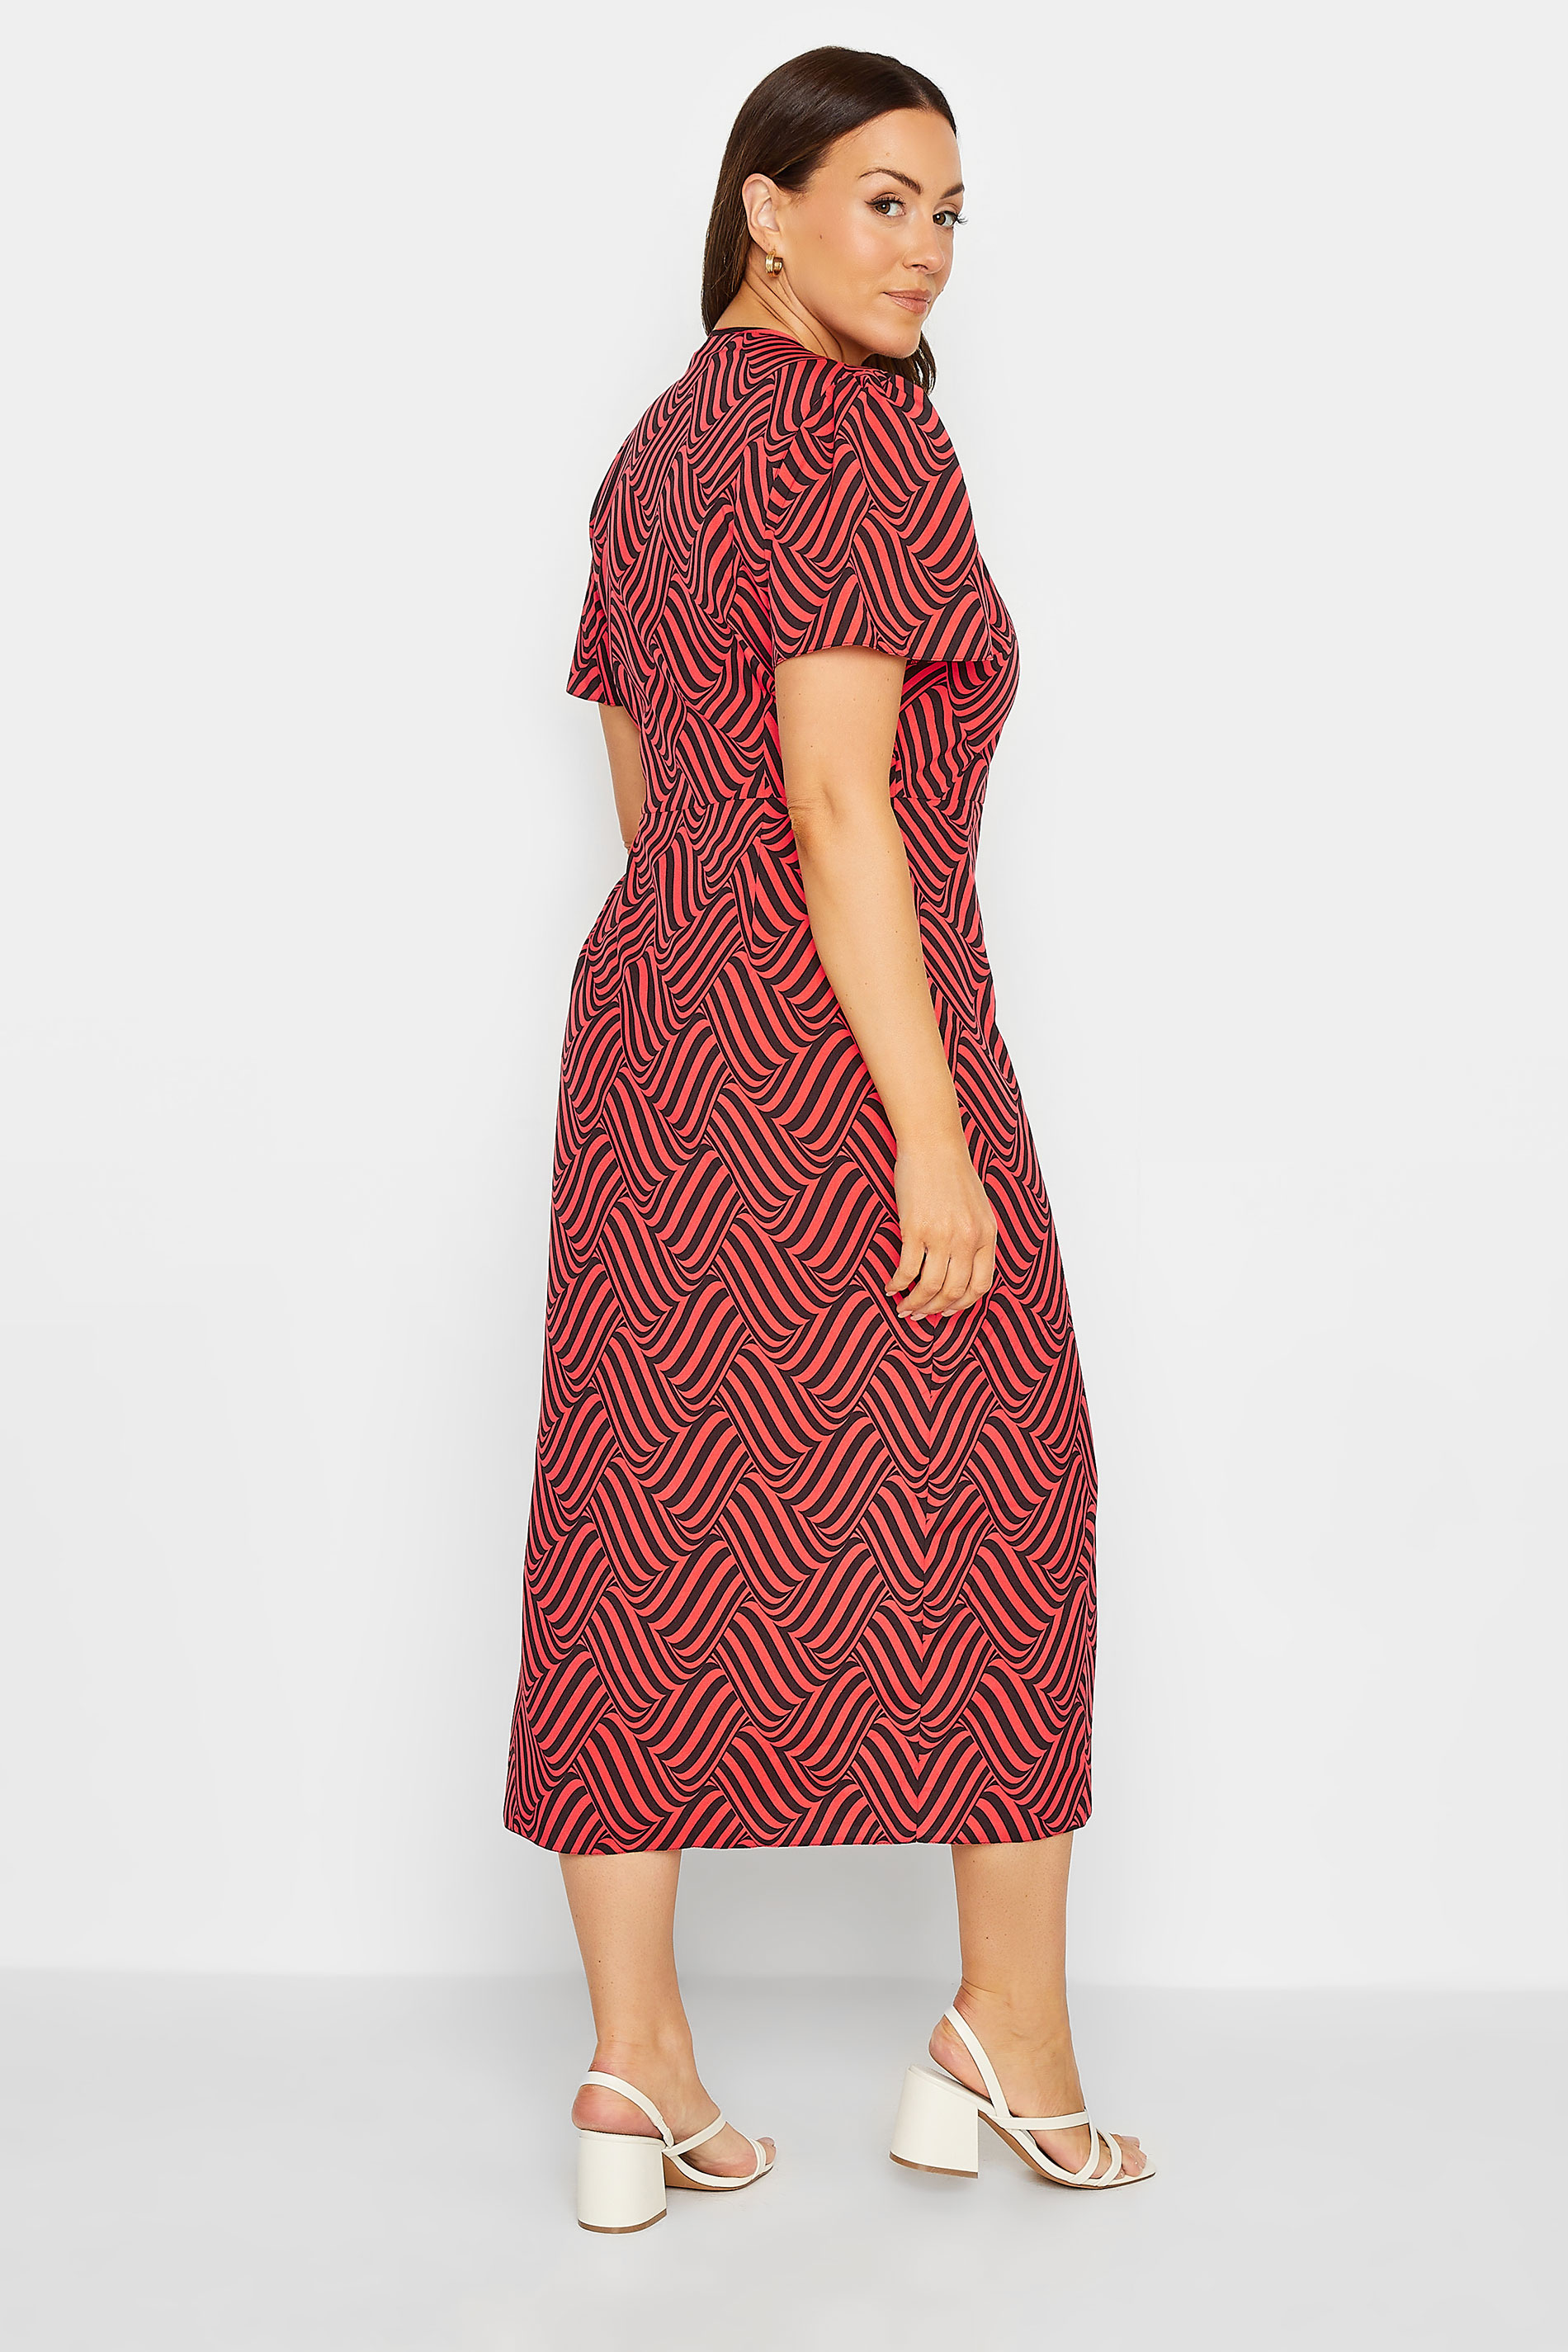 M&Co Red Abstract Stripe Wrap Dress | M&Co 3